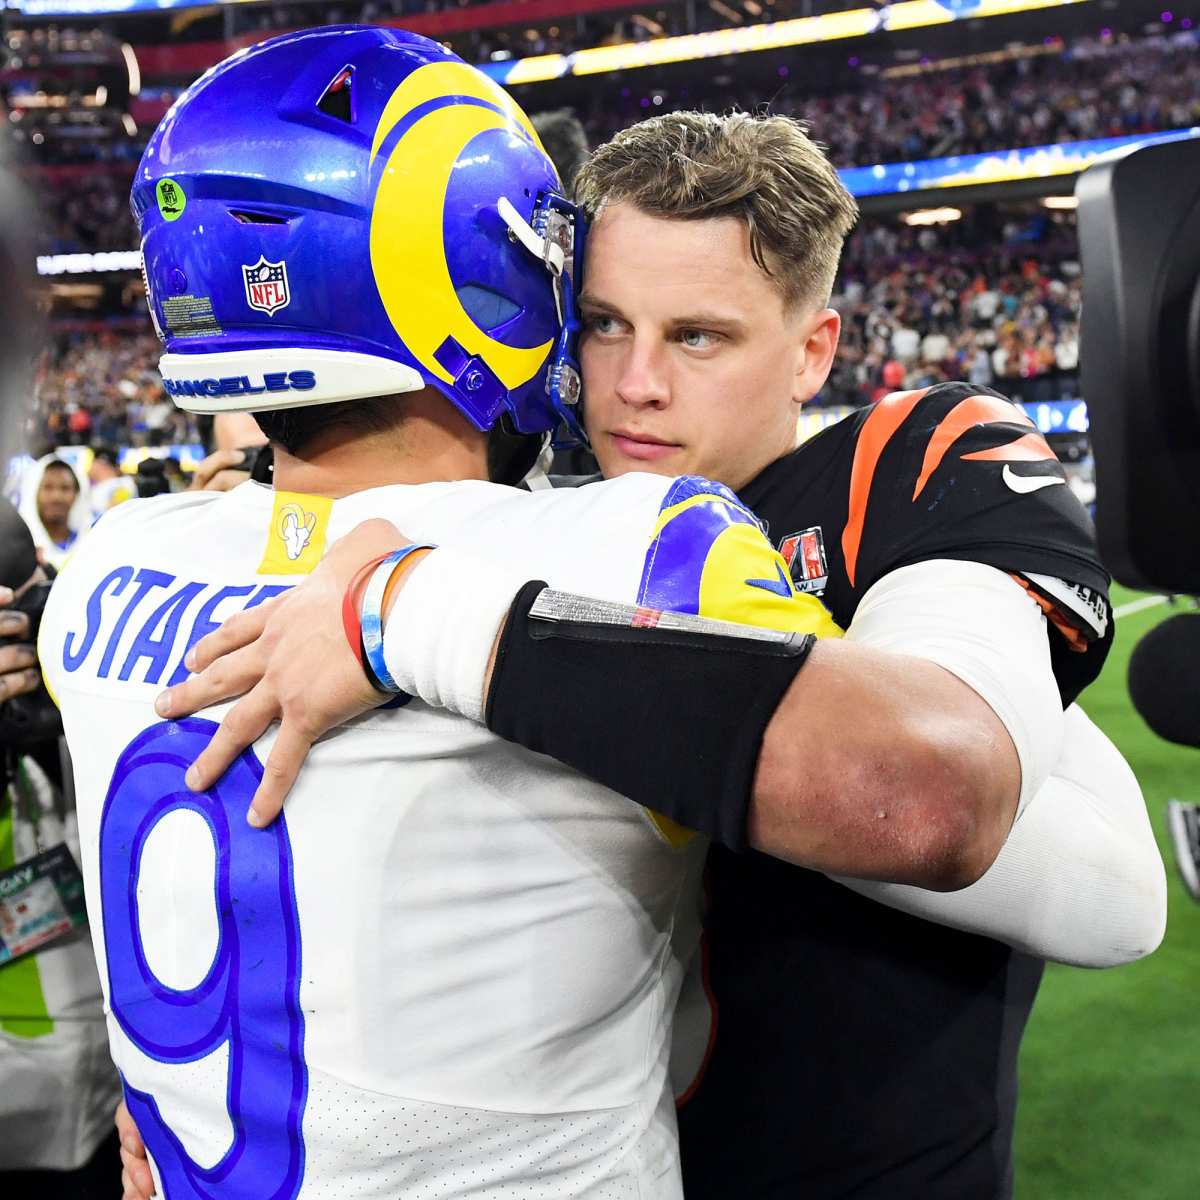 Joe Burrow Posted Throwback Selfie to Let Fans Know He's Back From